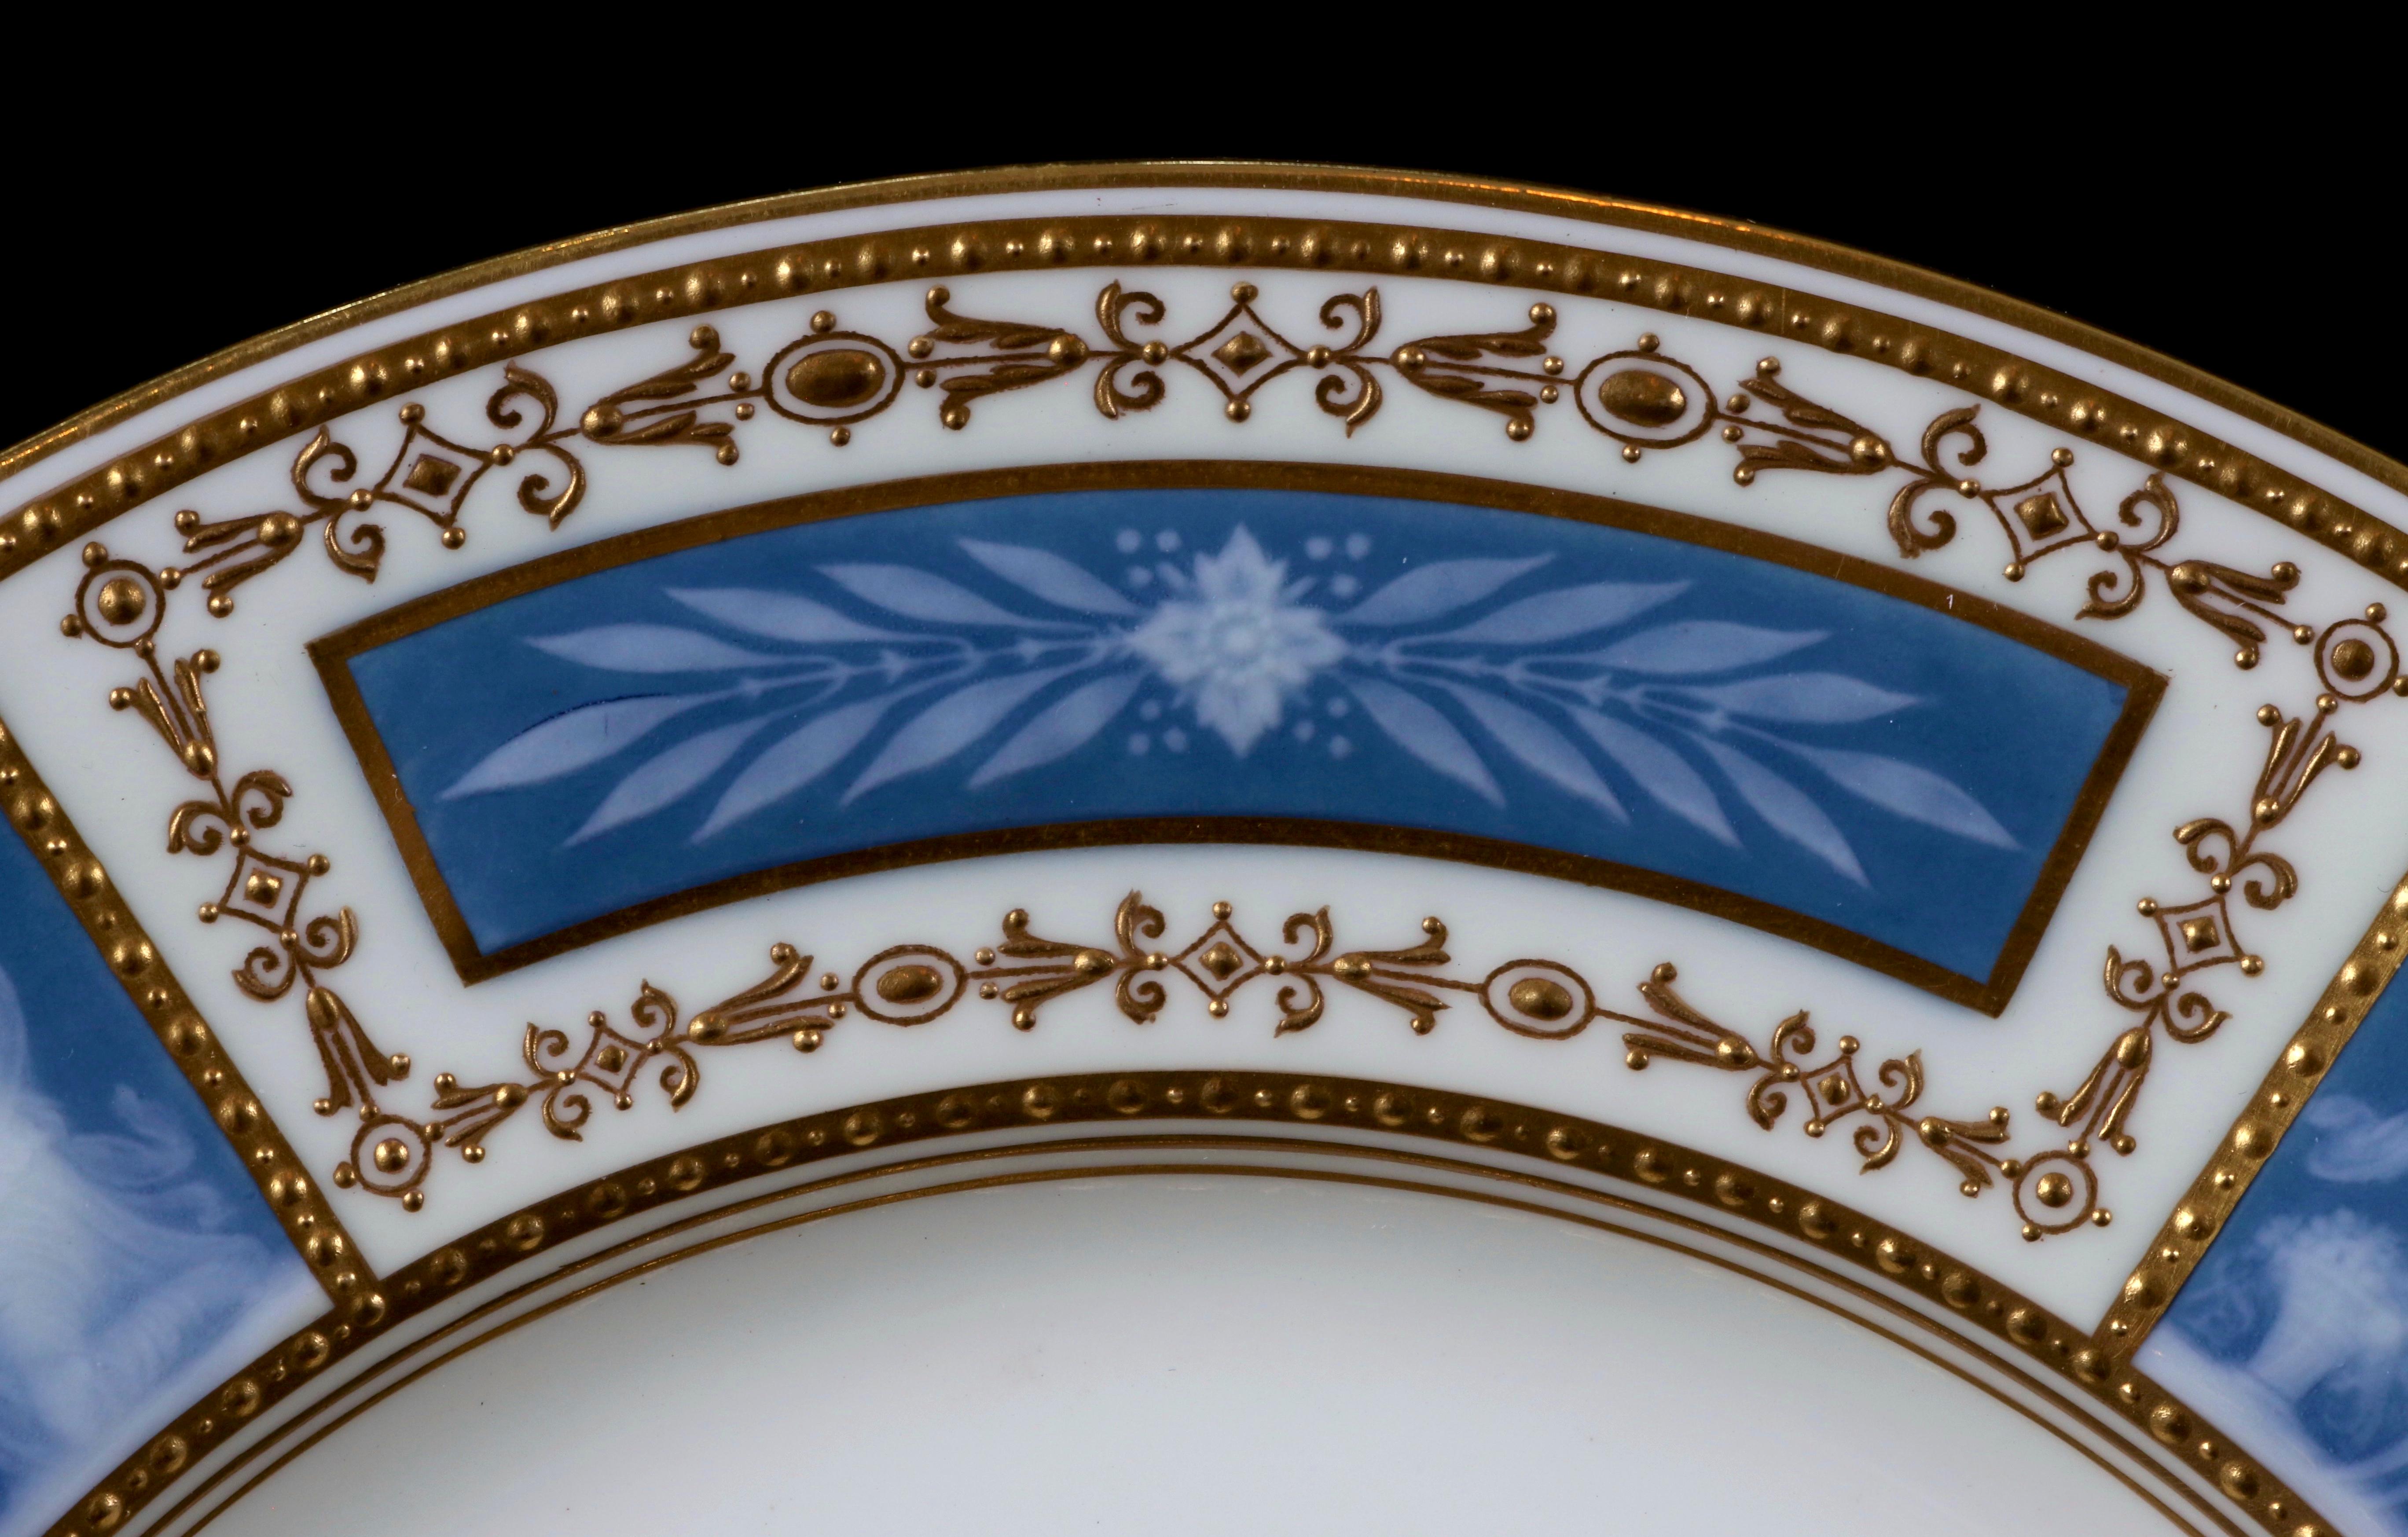 8 Minton Pate-sur-pate Blue Plates for Tiffany, by Artist Albion Birks In Excellent Condition For Sale In New York, NY